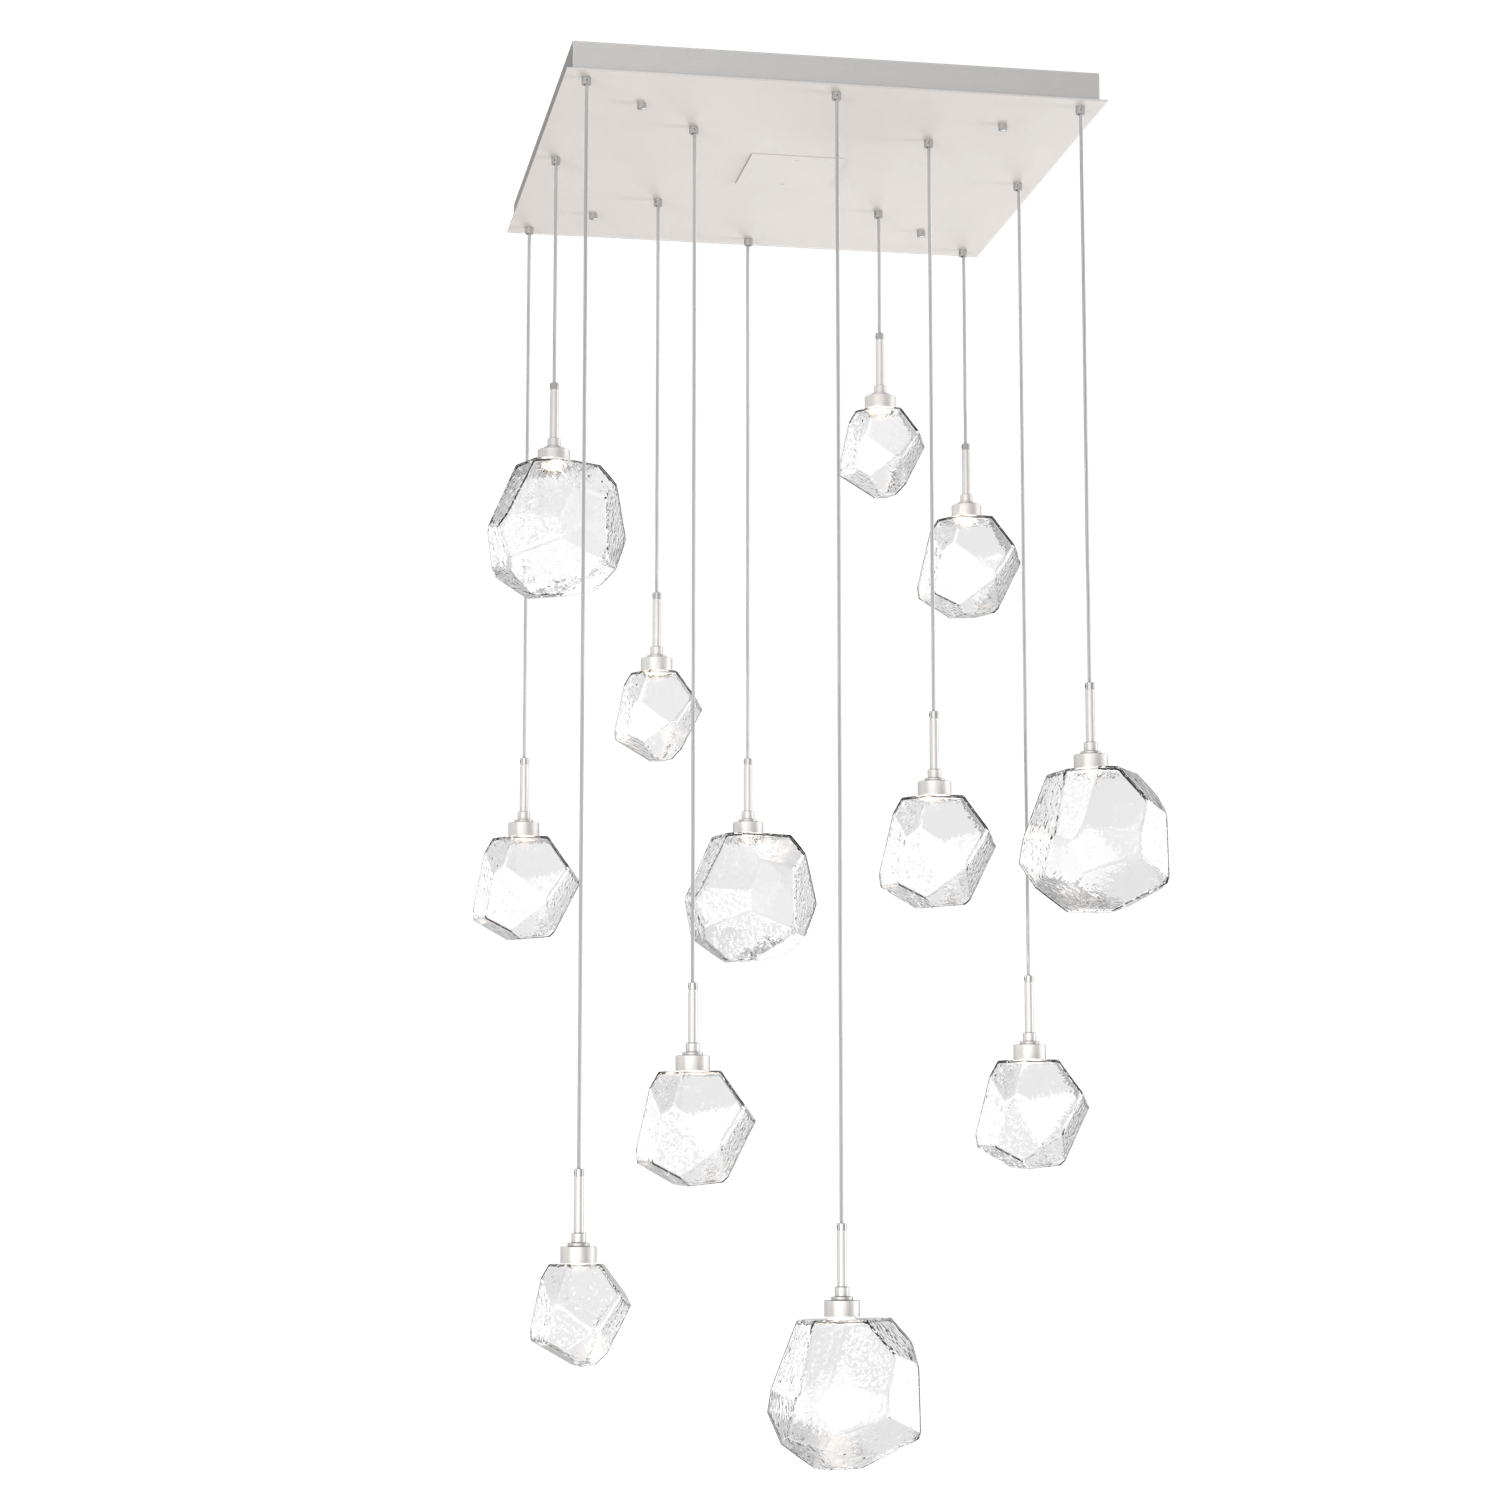 CHB0039-12-BS-C-Hammerton-Studio-Gem-12-light-square-pendant-chandelier-with-metallic-beige-silver-finish-and-clear-blown-glass-shades-and-LED-lamping